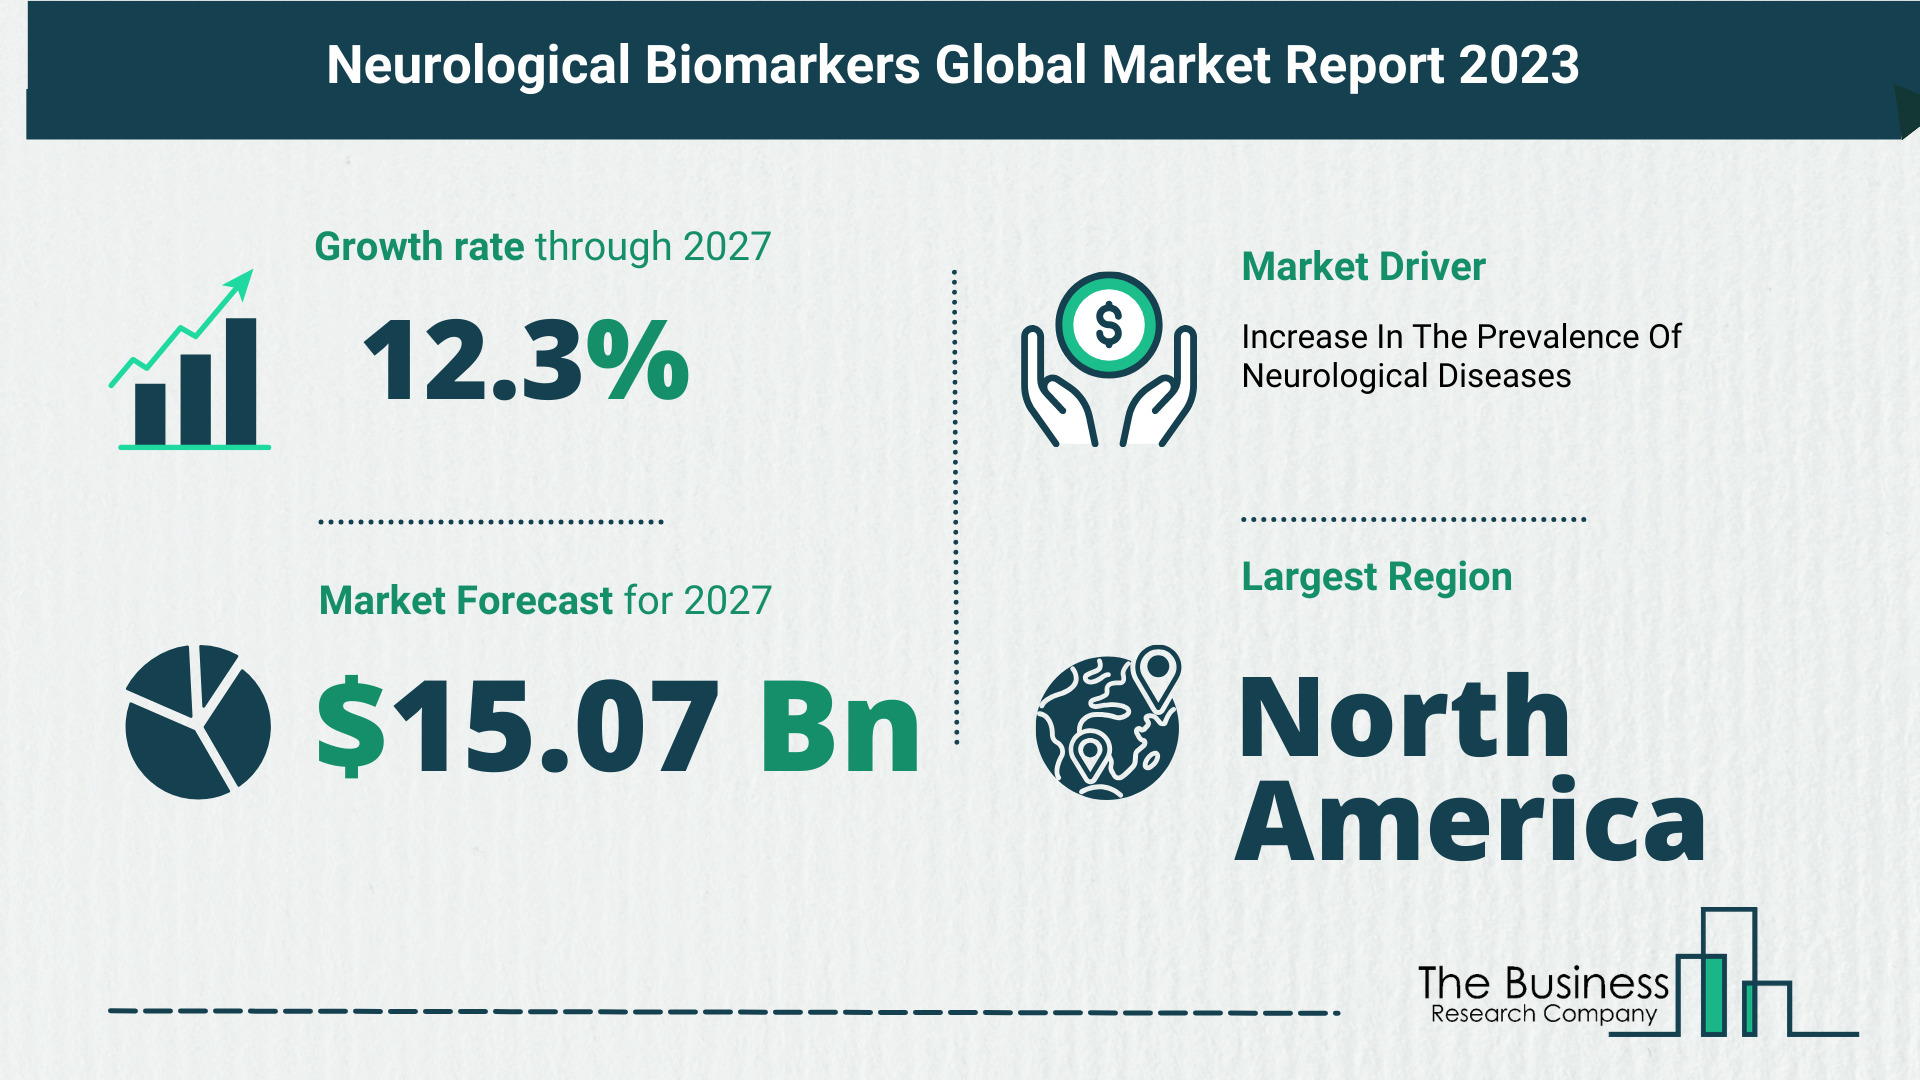 Future Growth Forecast For The Neurological Biomarkers Global Market 2023-2032